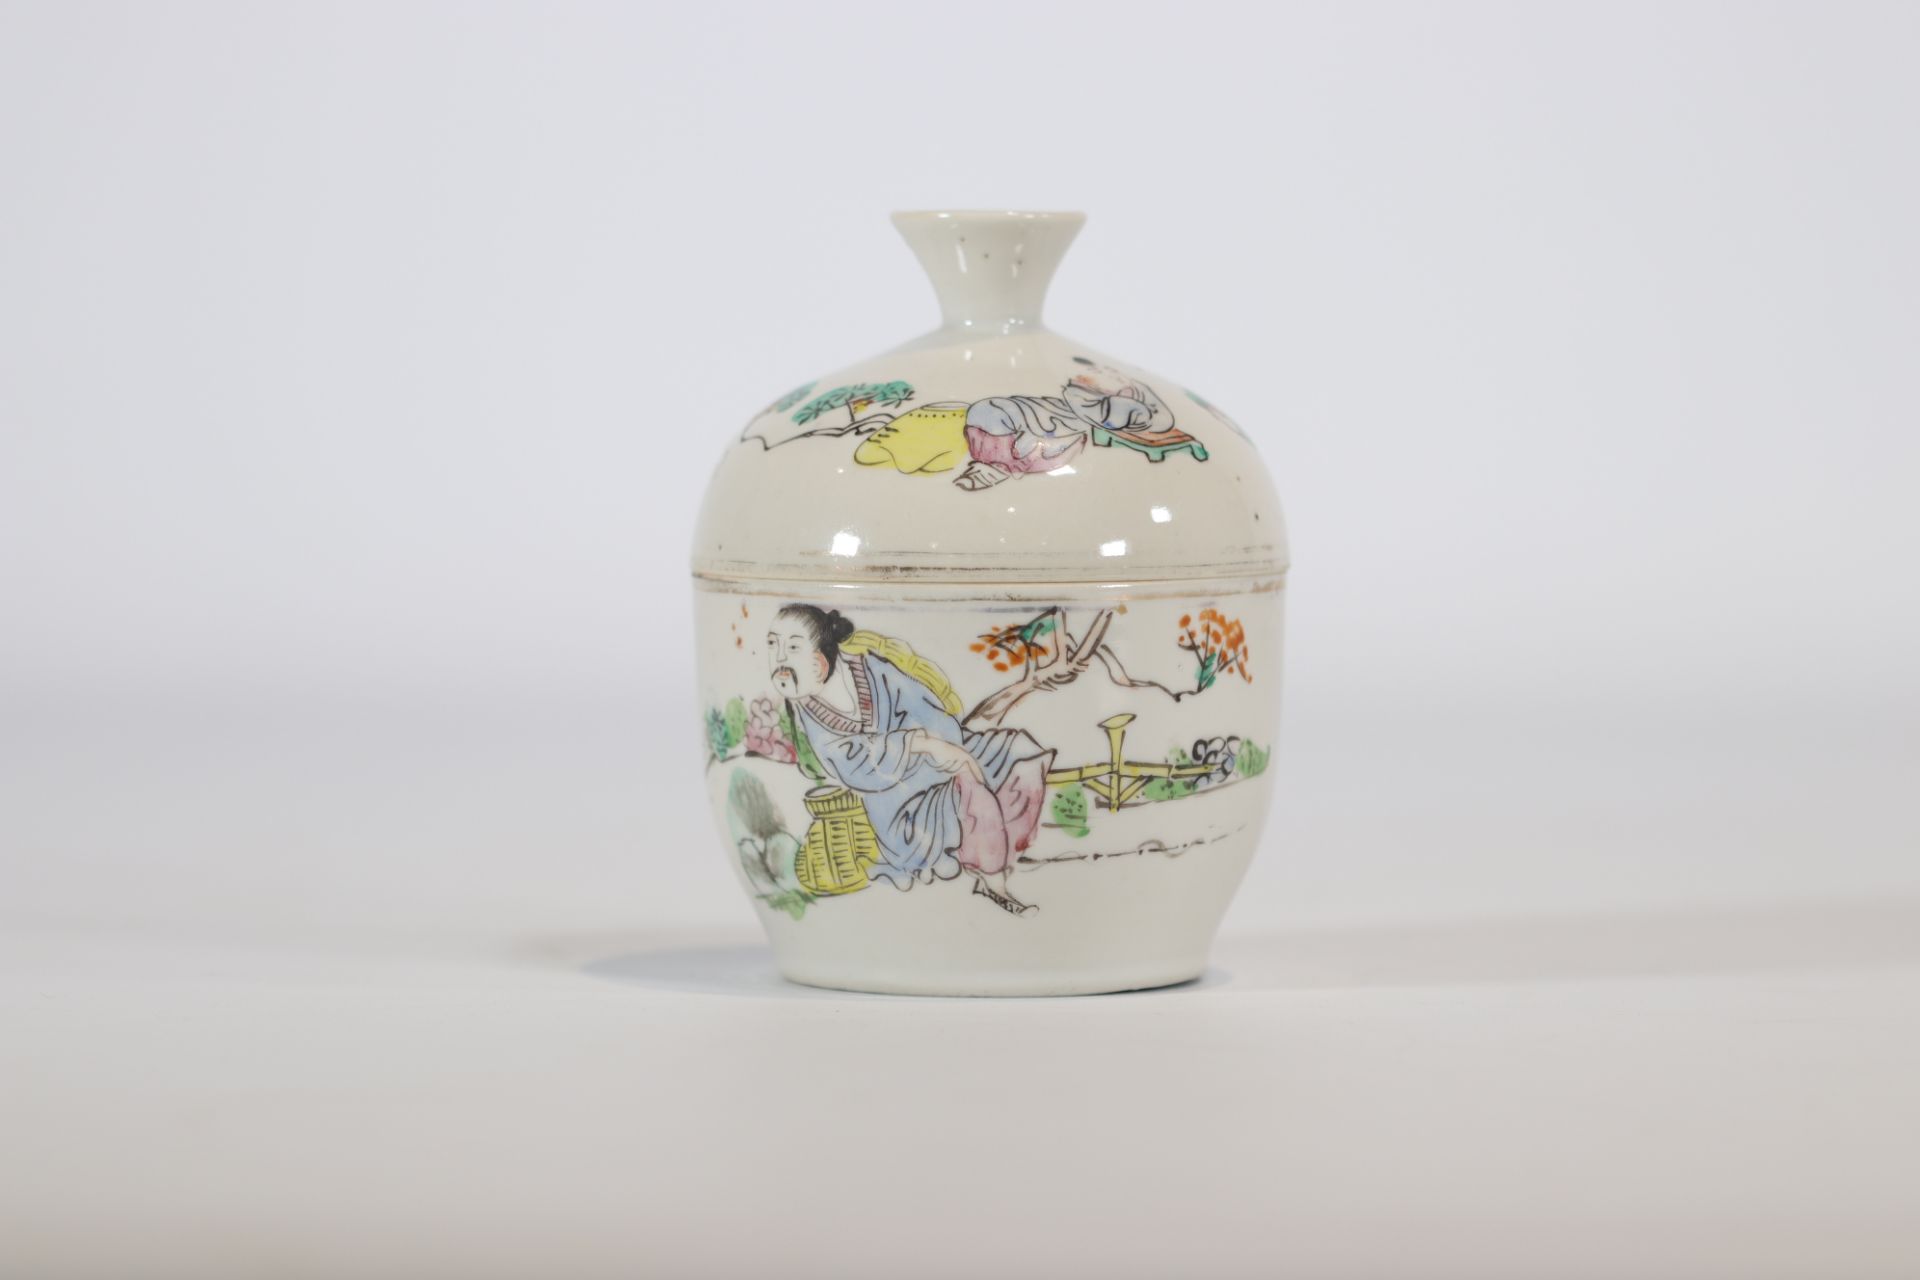 Covered Chinese porcelain pot decorated with figures